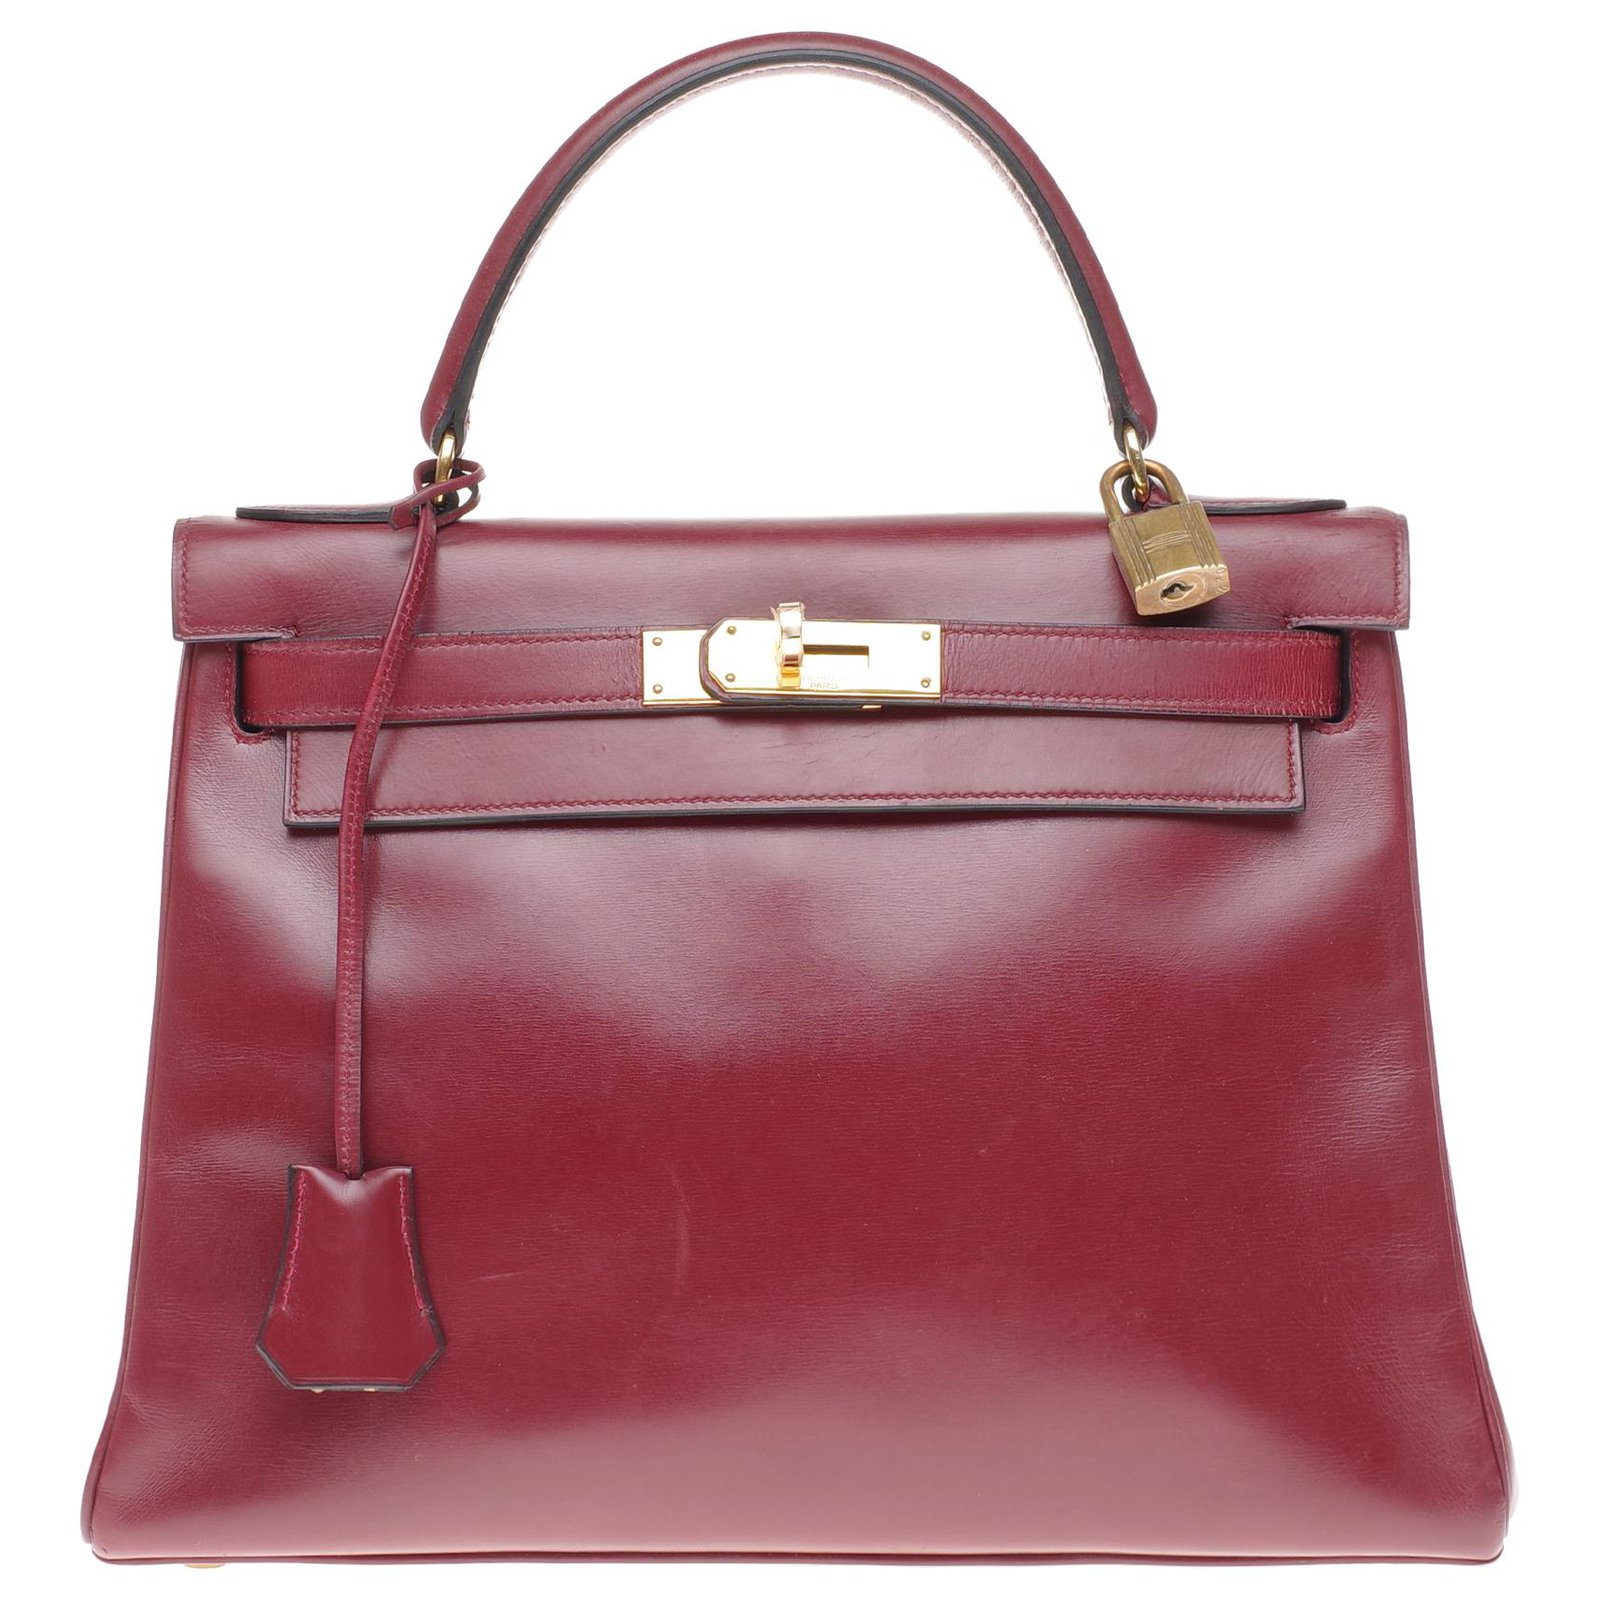 Hermès hermes kelly 28 Leather Box Red H, gold-plated metal trim in ...